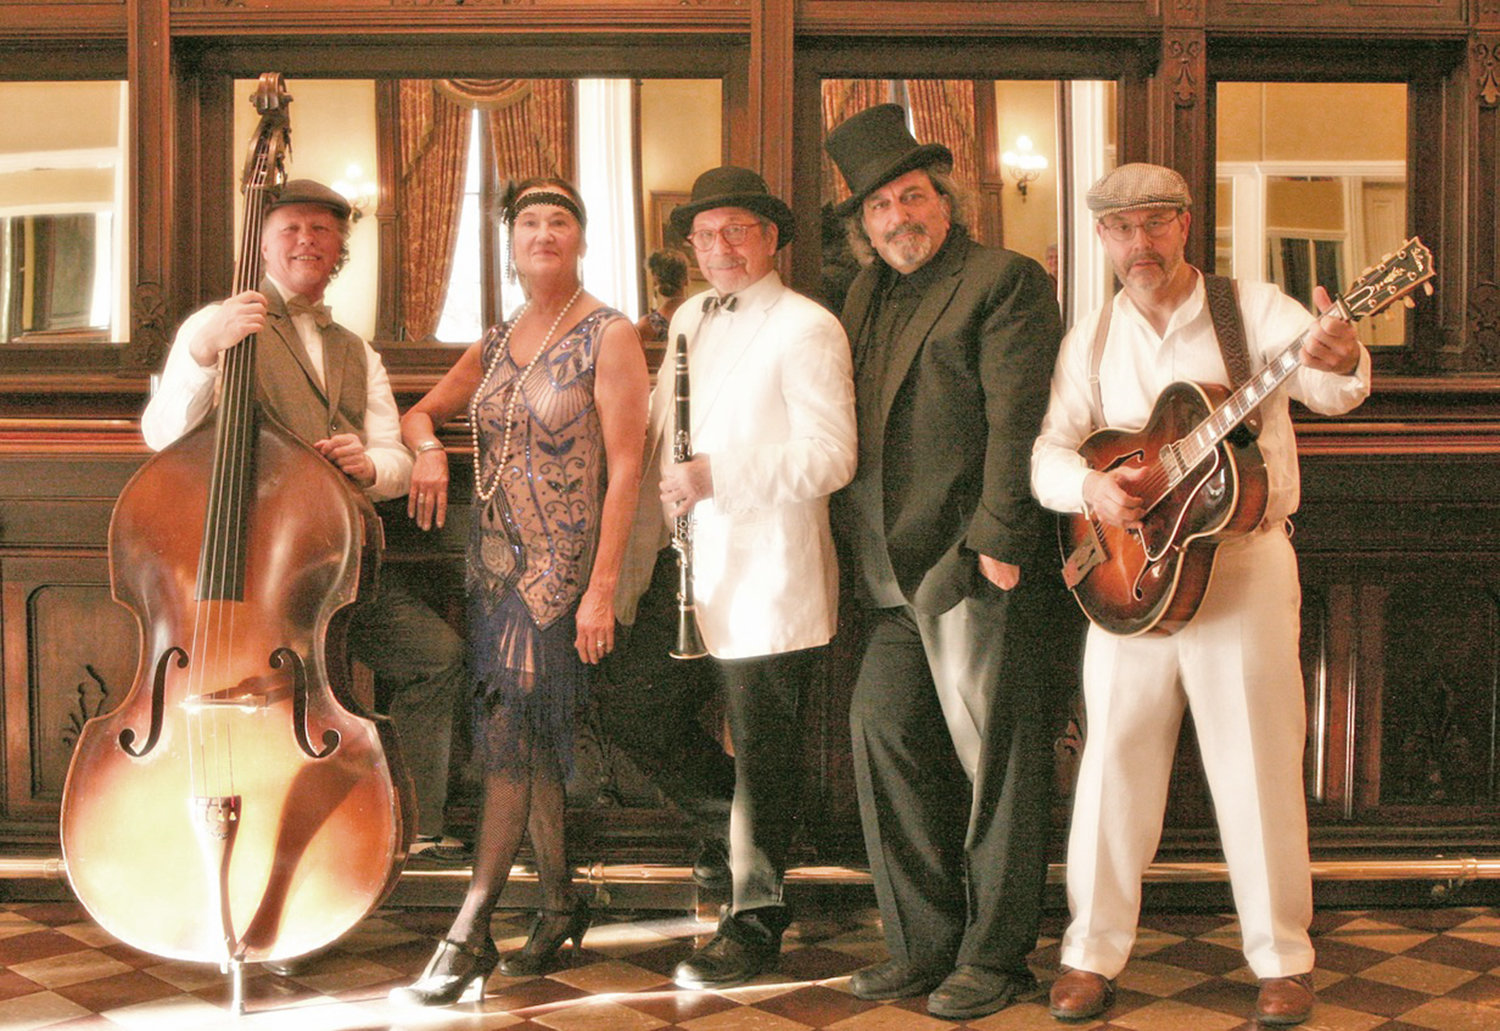 The Unity Hall music series welcomes Annie and the Hedonists at 8 p.m. Saturday, Nov. 12, in Barneveld.